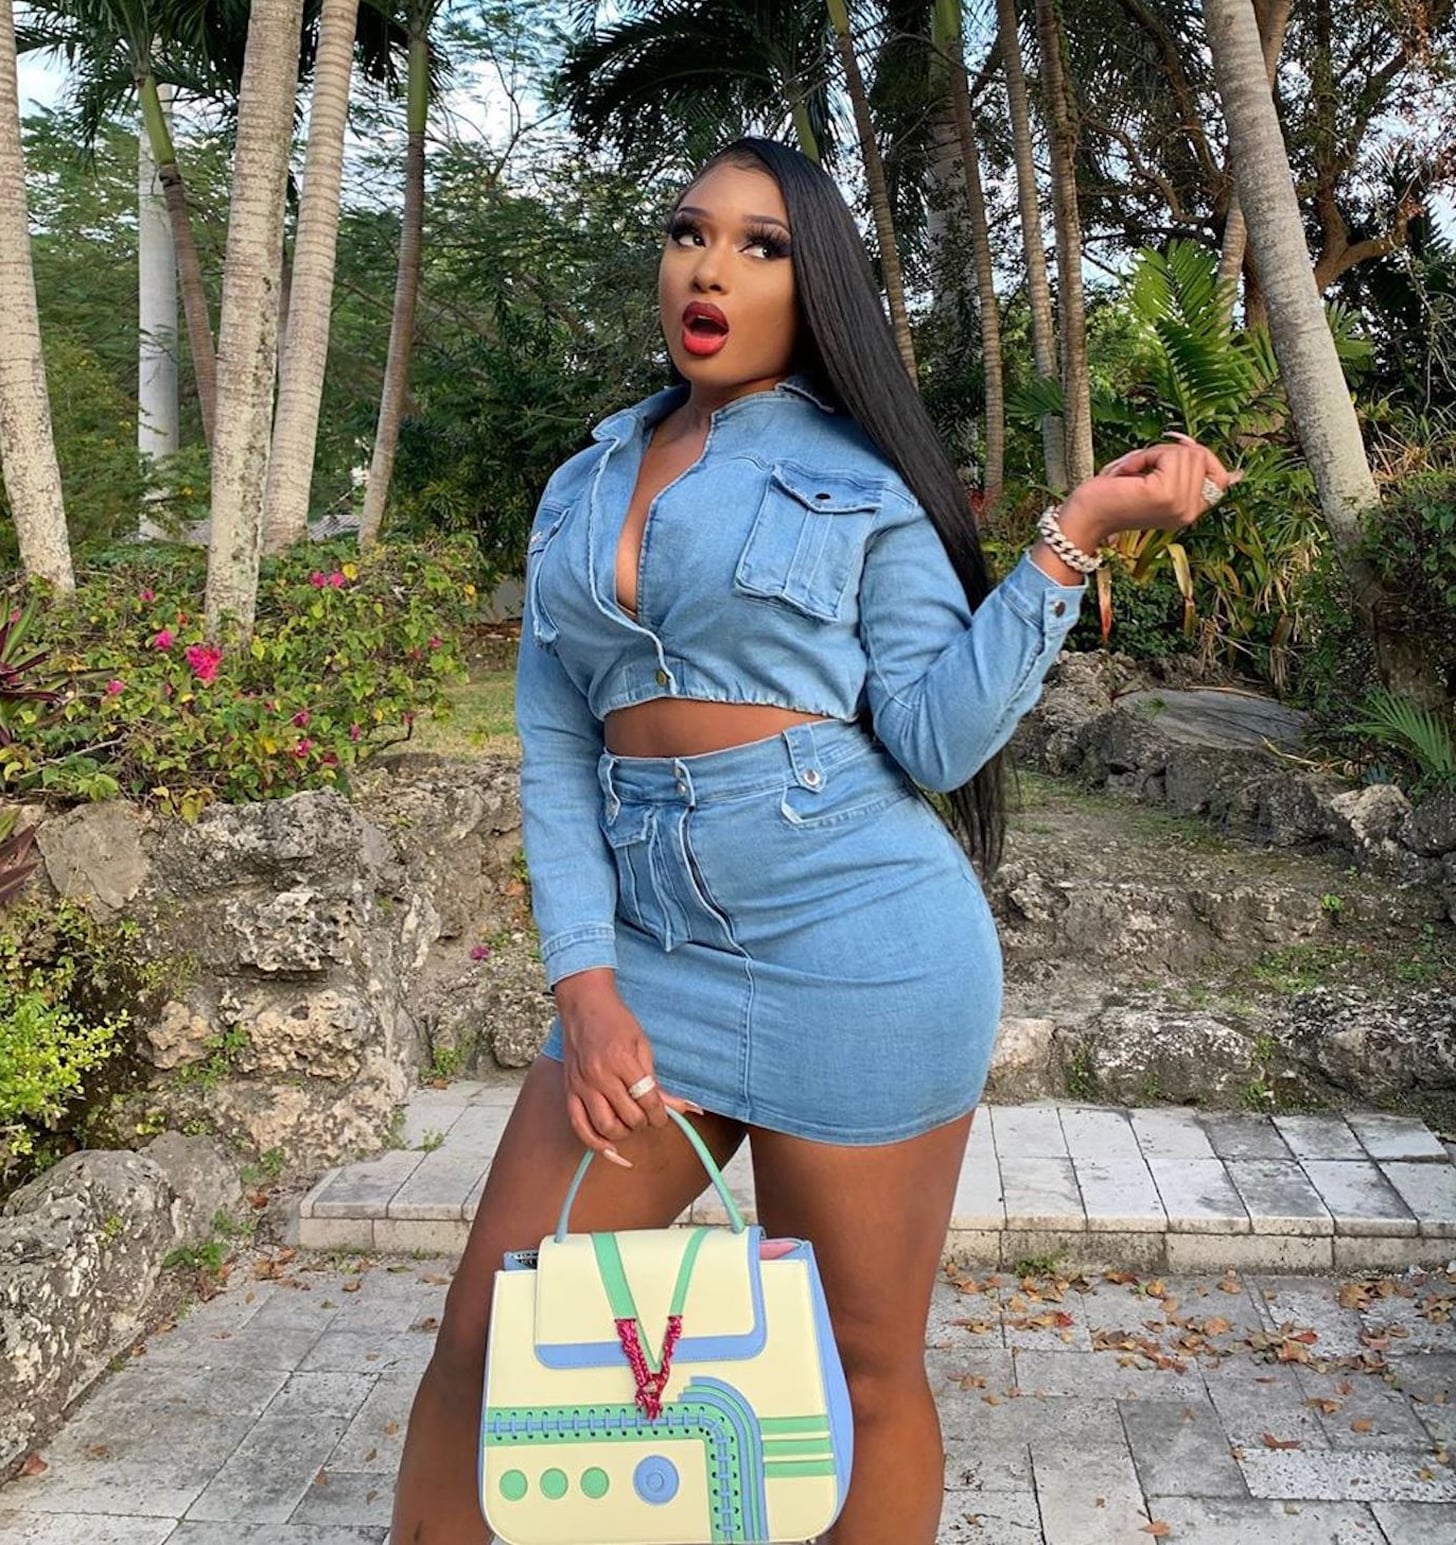 Megan Thee Stallion heats up Tik Tok and Instagram in lingerie sets by  Rihanna's Savage X Fenty line